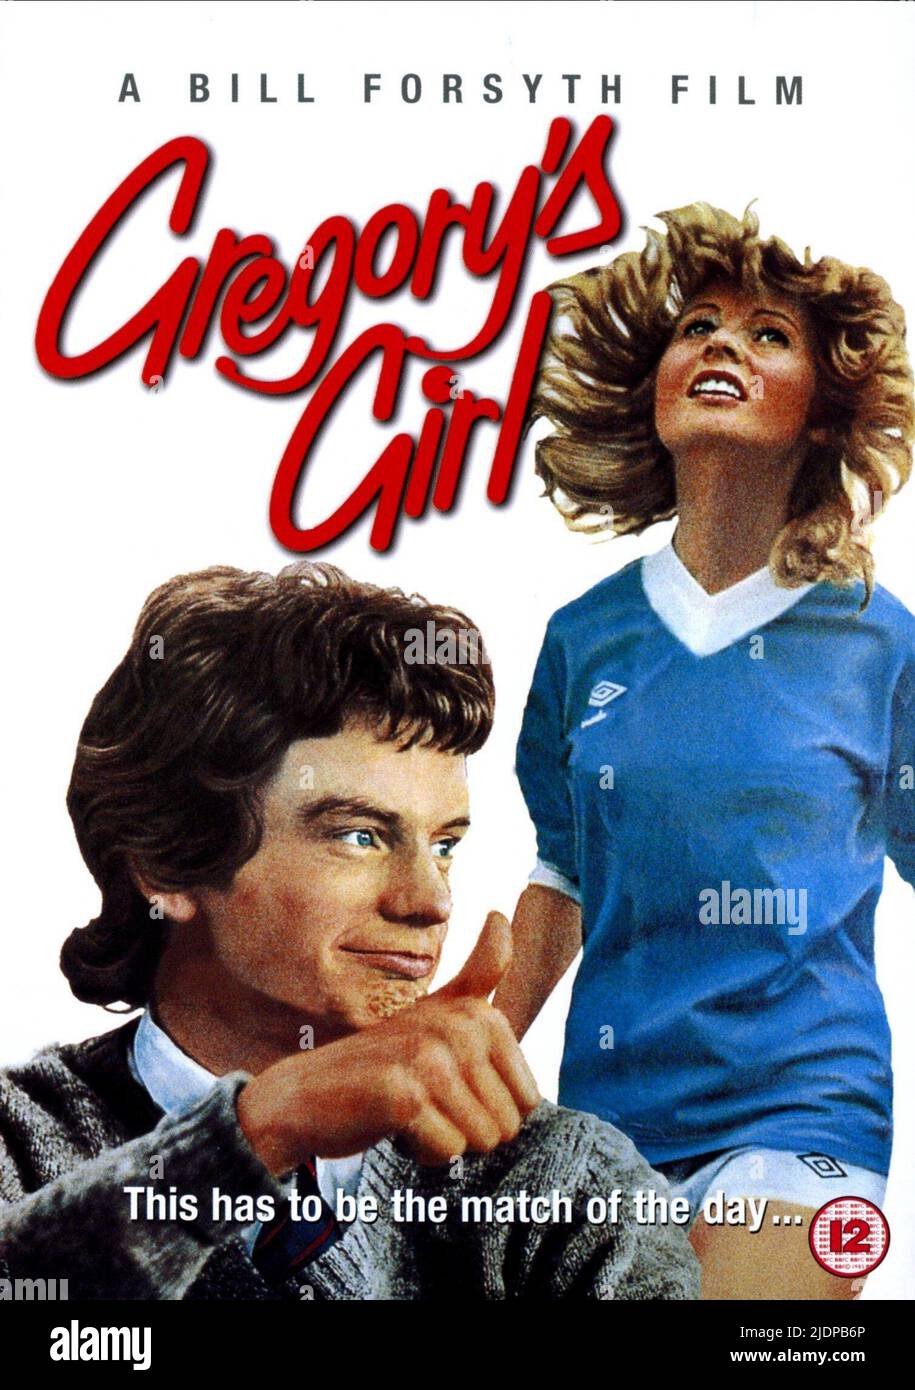 SINCLAIR,POSTER, GREGORY'S GIRL, 1981 Stock Photo